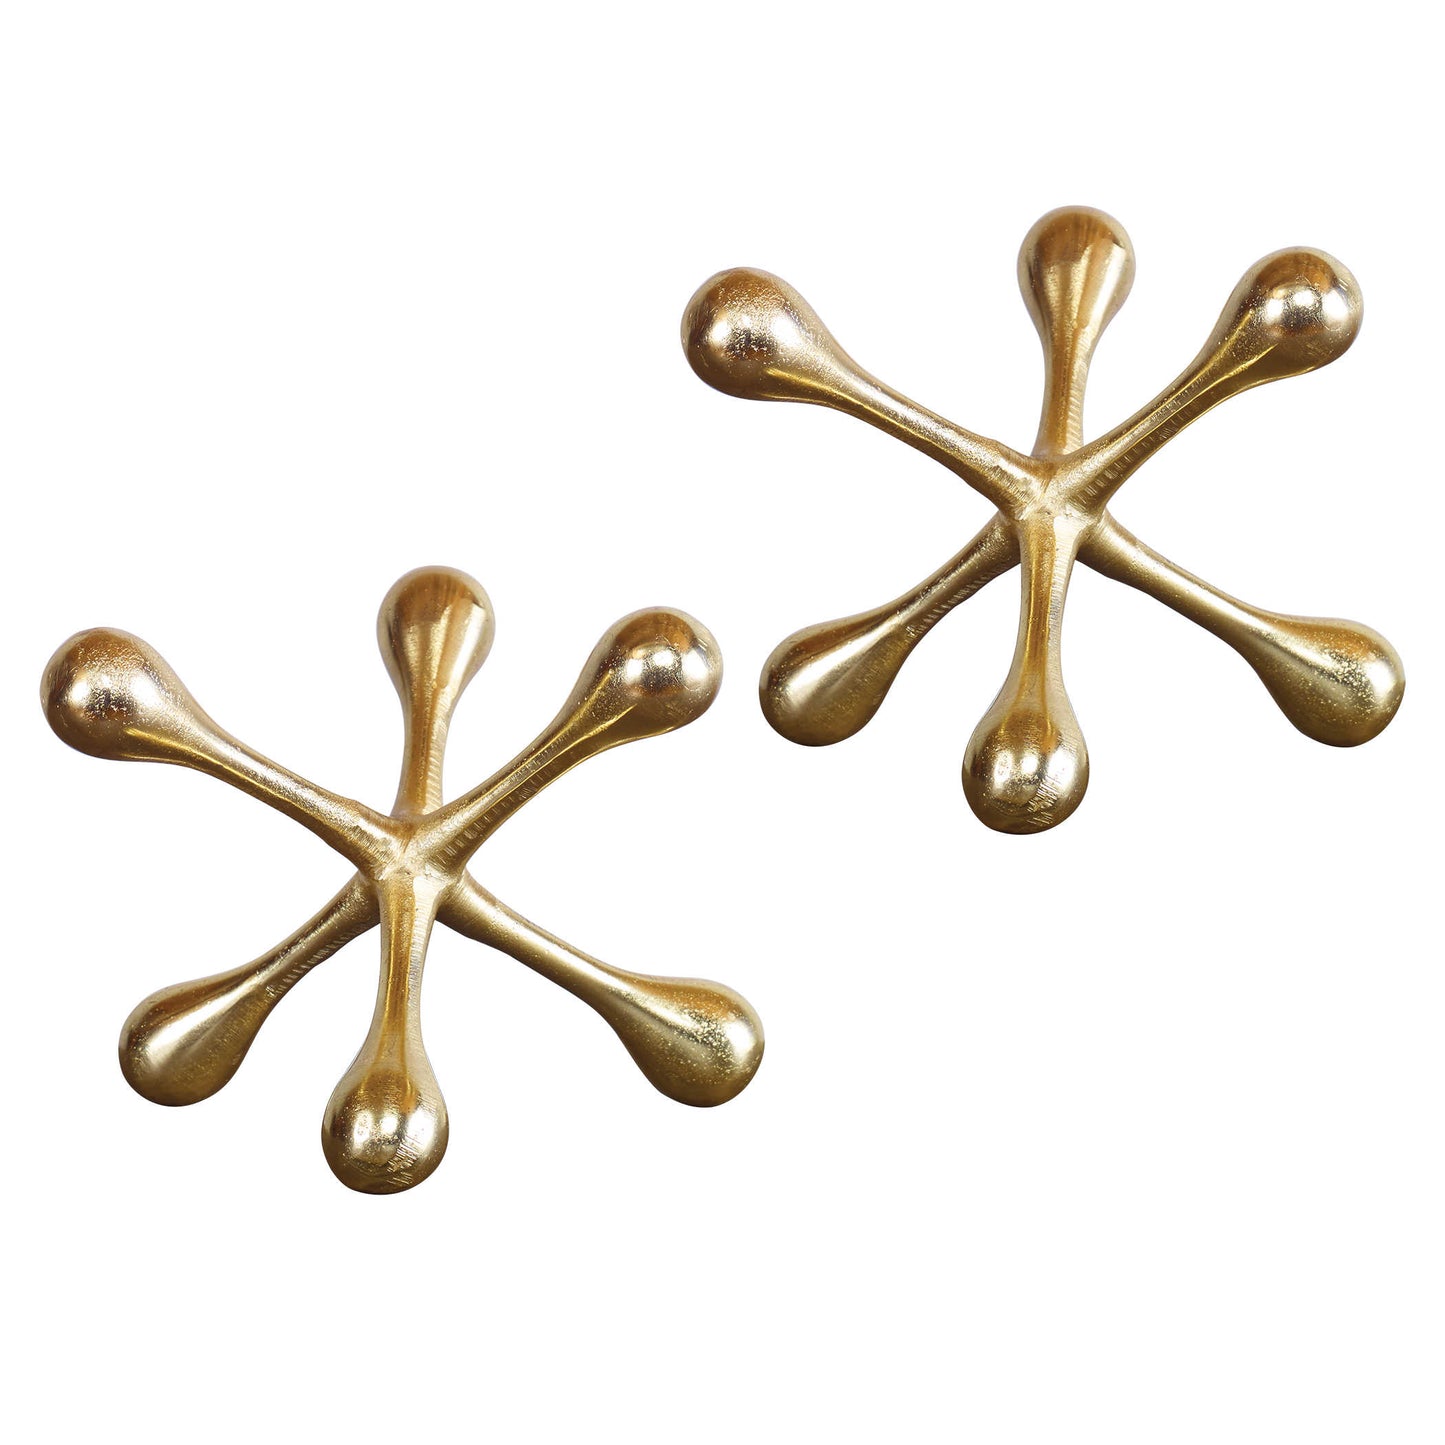 Harlan Brass Decorative Objects Set of 2